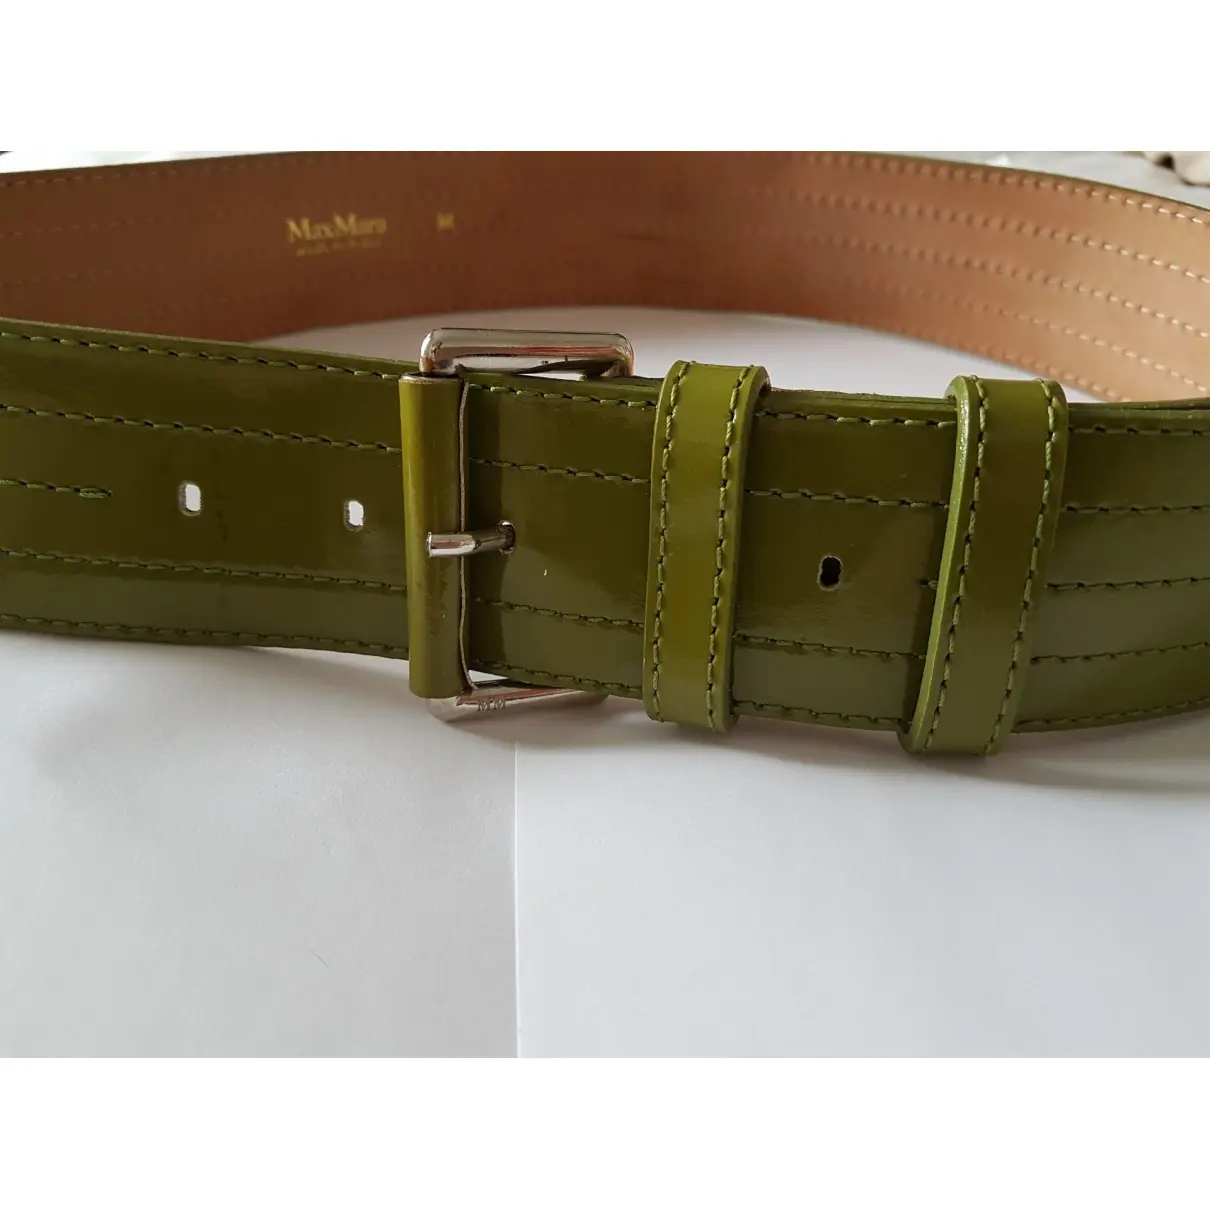 Max Mara Patent leather belt for sale